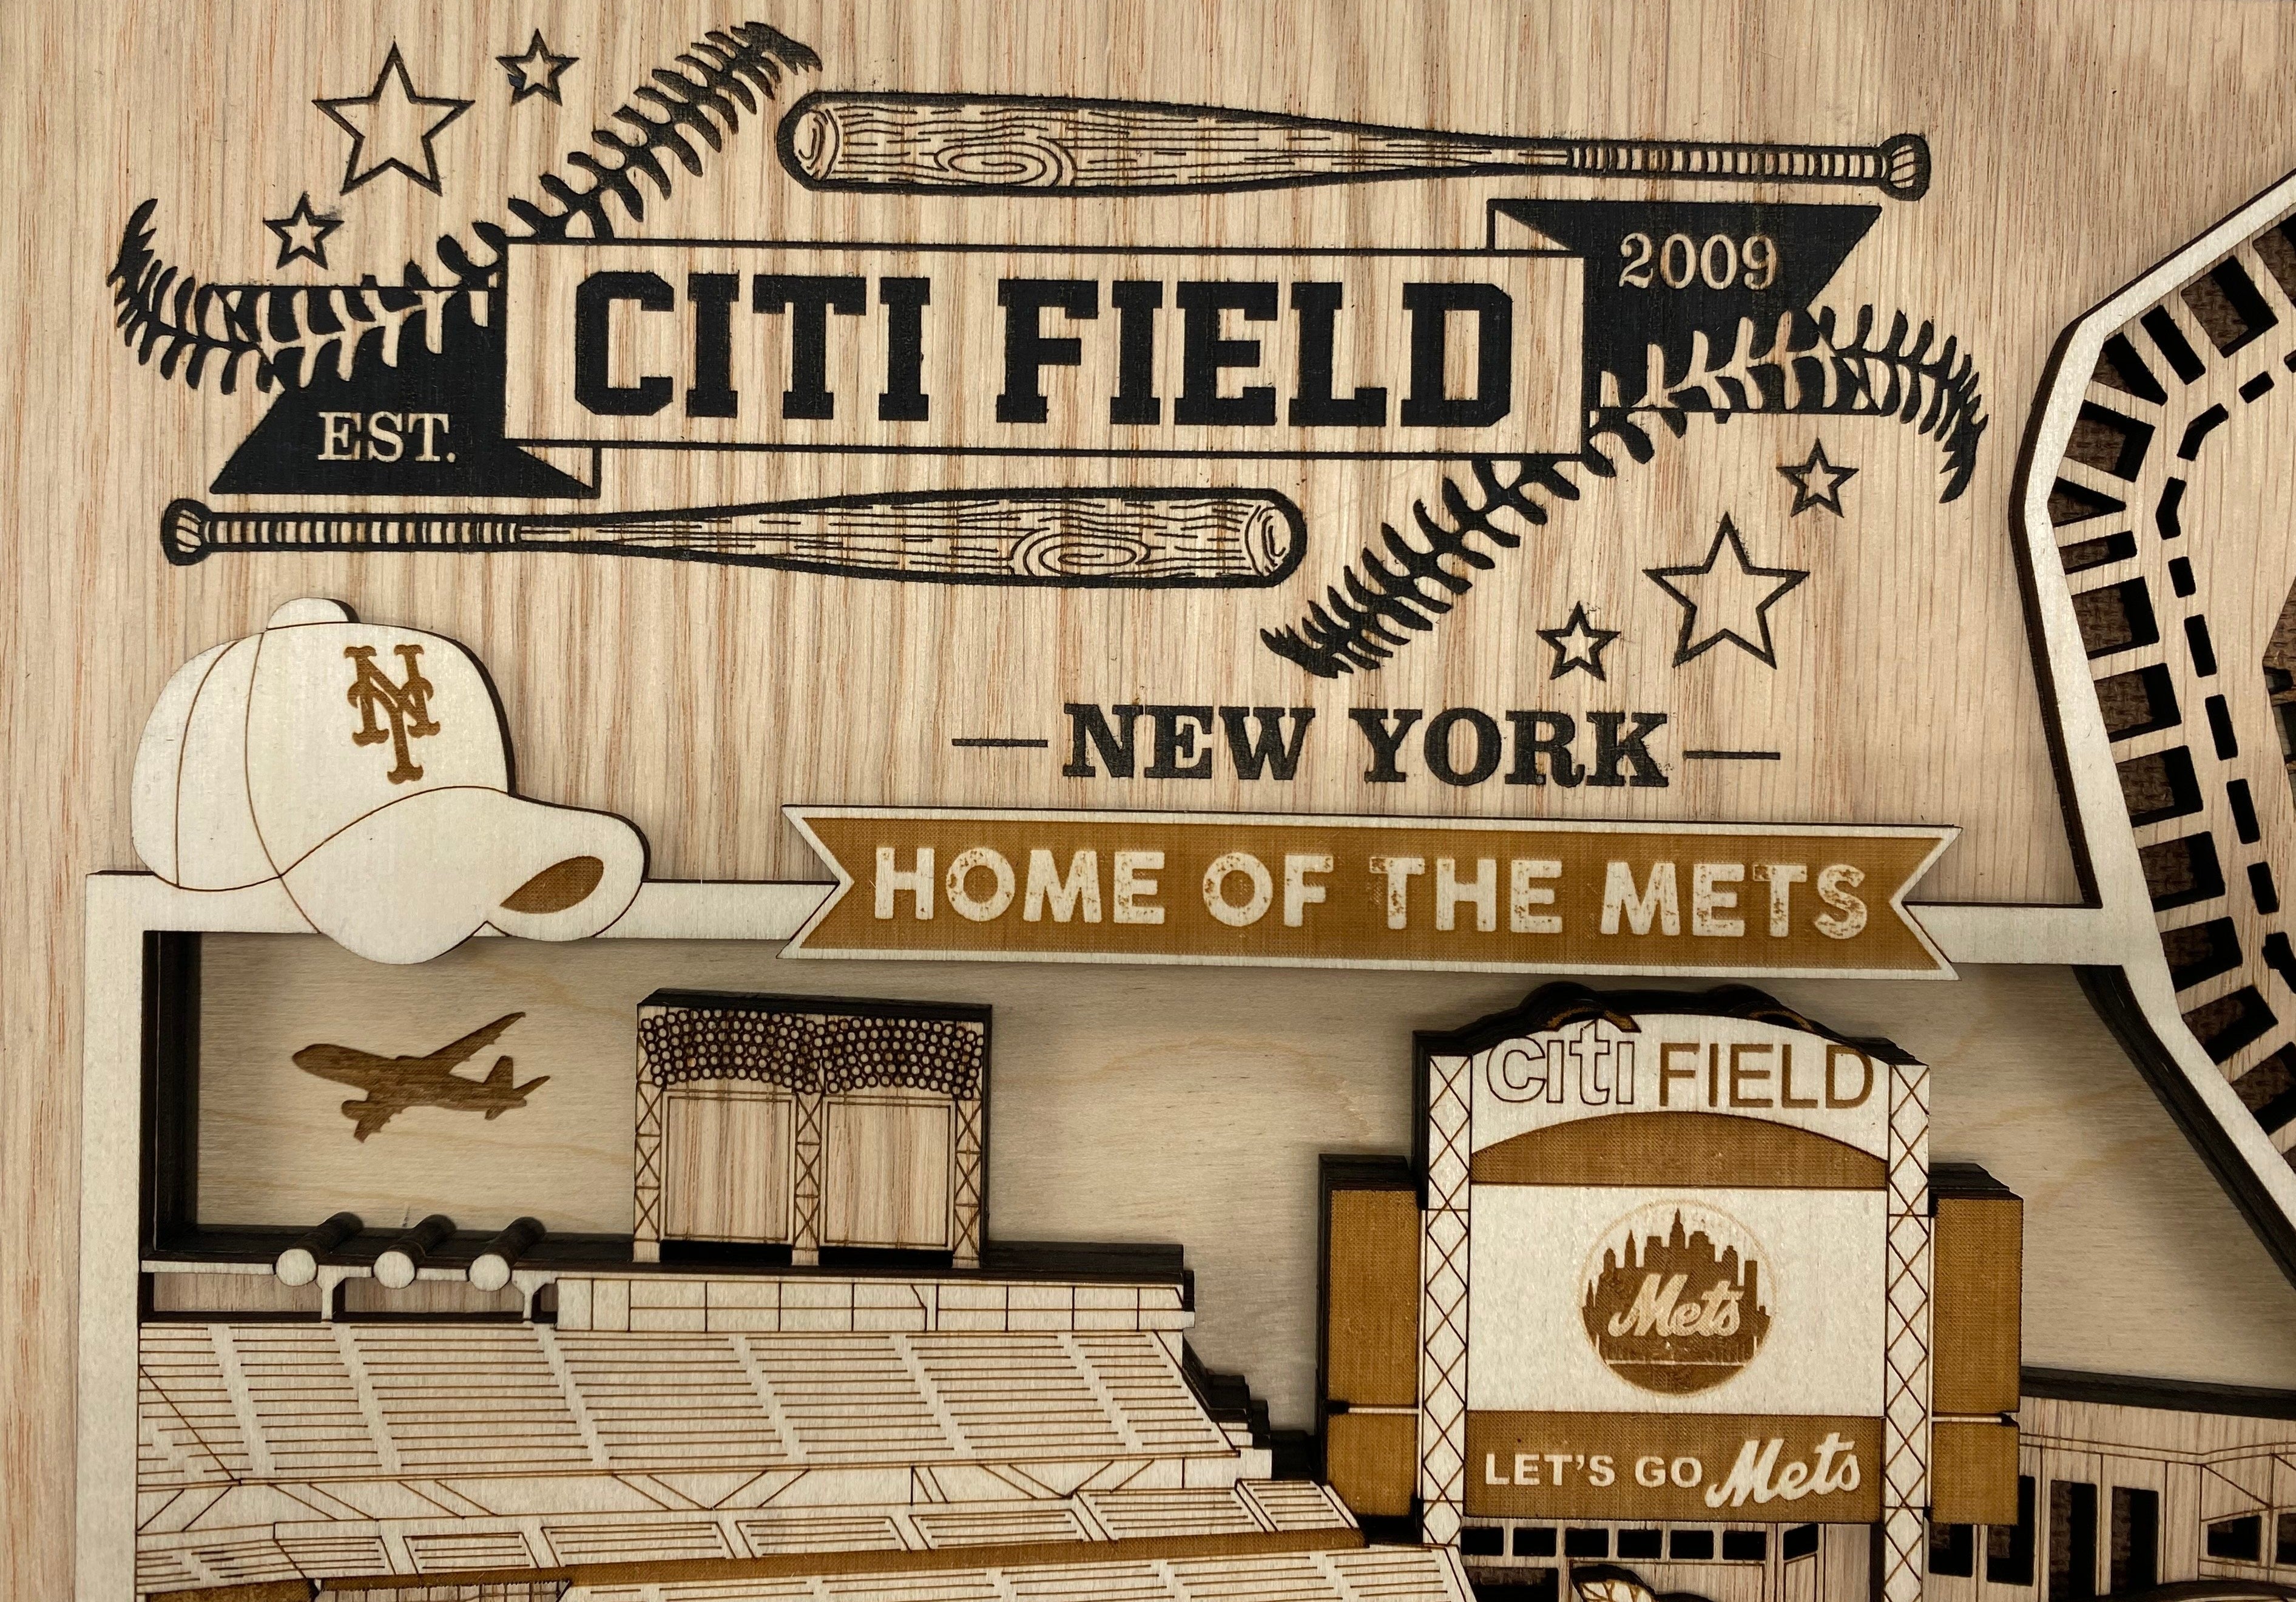 Citi Field - Home of the New York Mets - Layered Wooden Stadium with the Inside View of the Ballpark